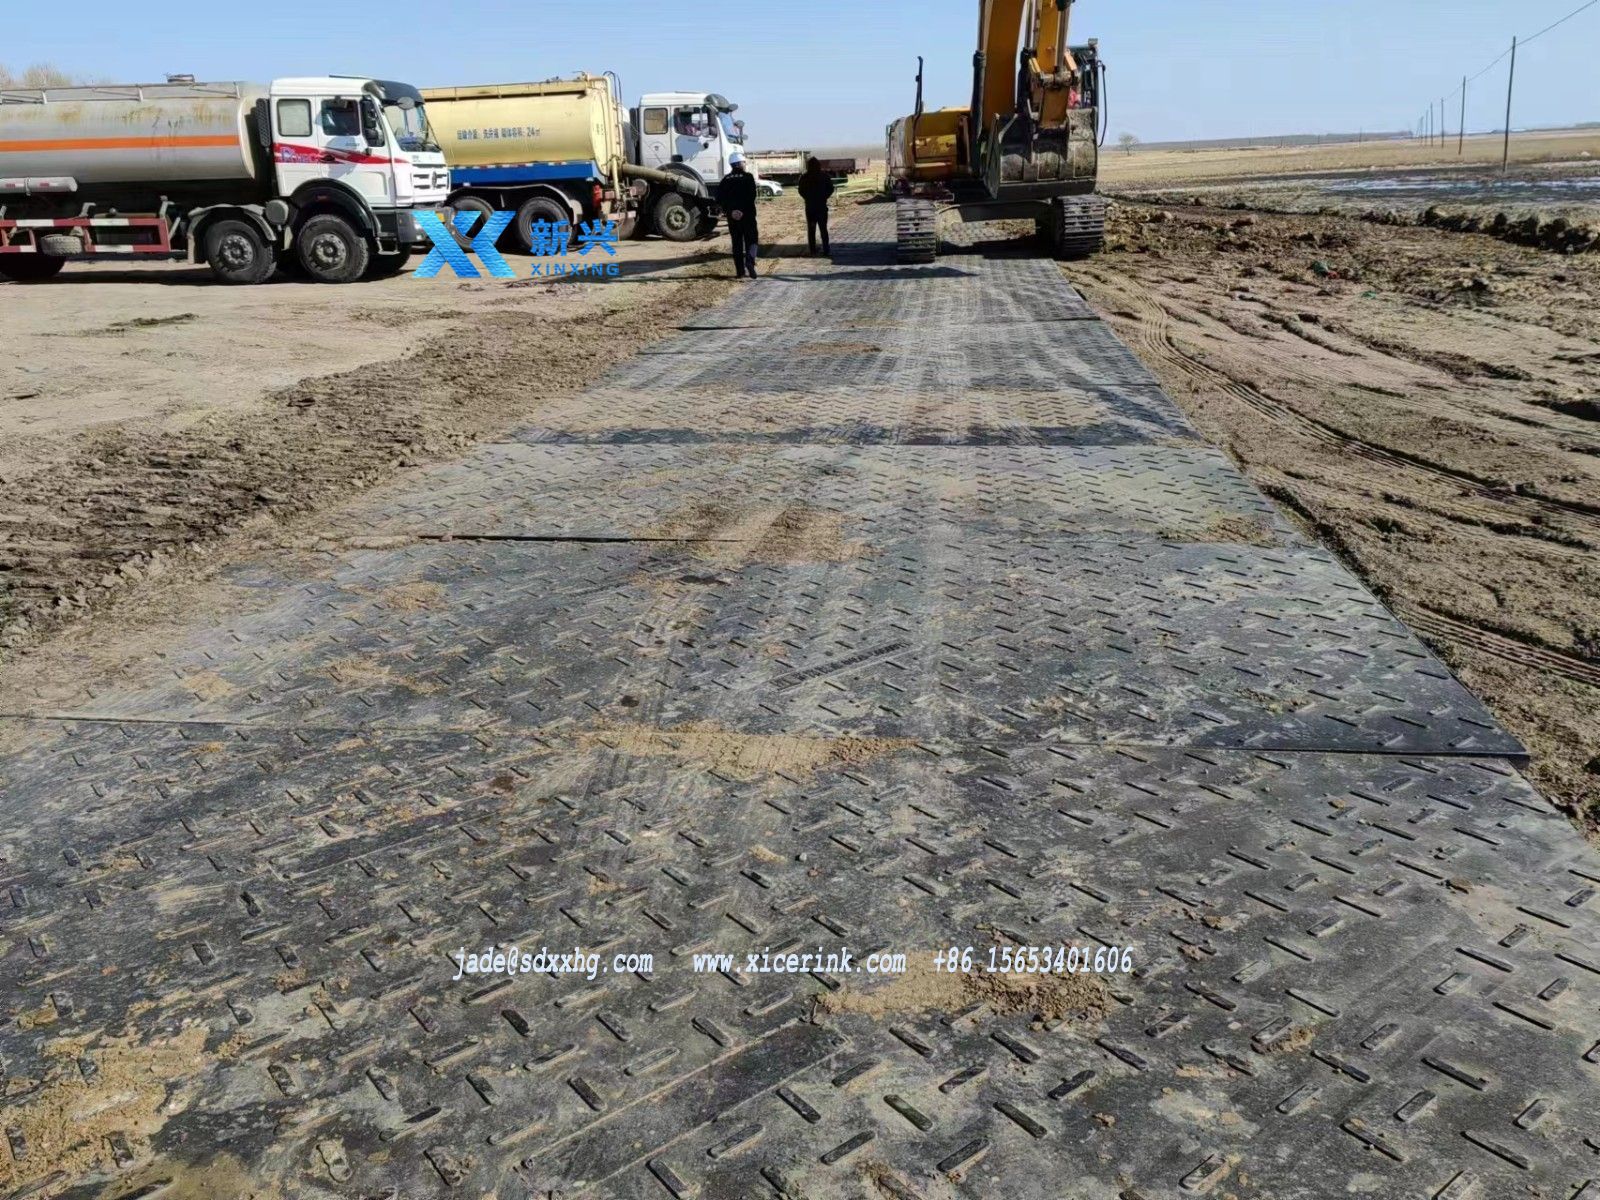 2050 x 4100 x 37 mm heavy duty ground protection rig mats